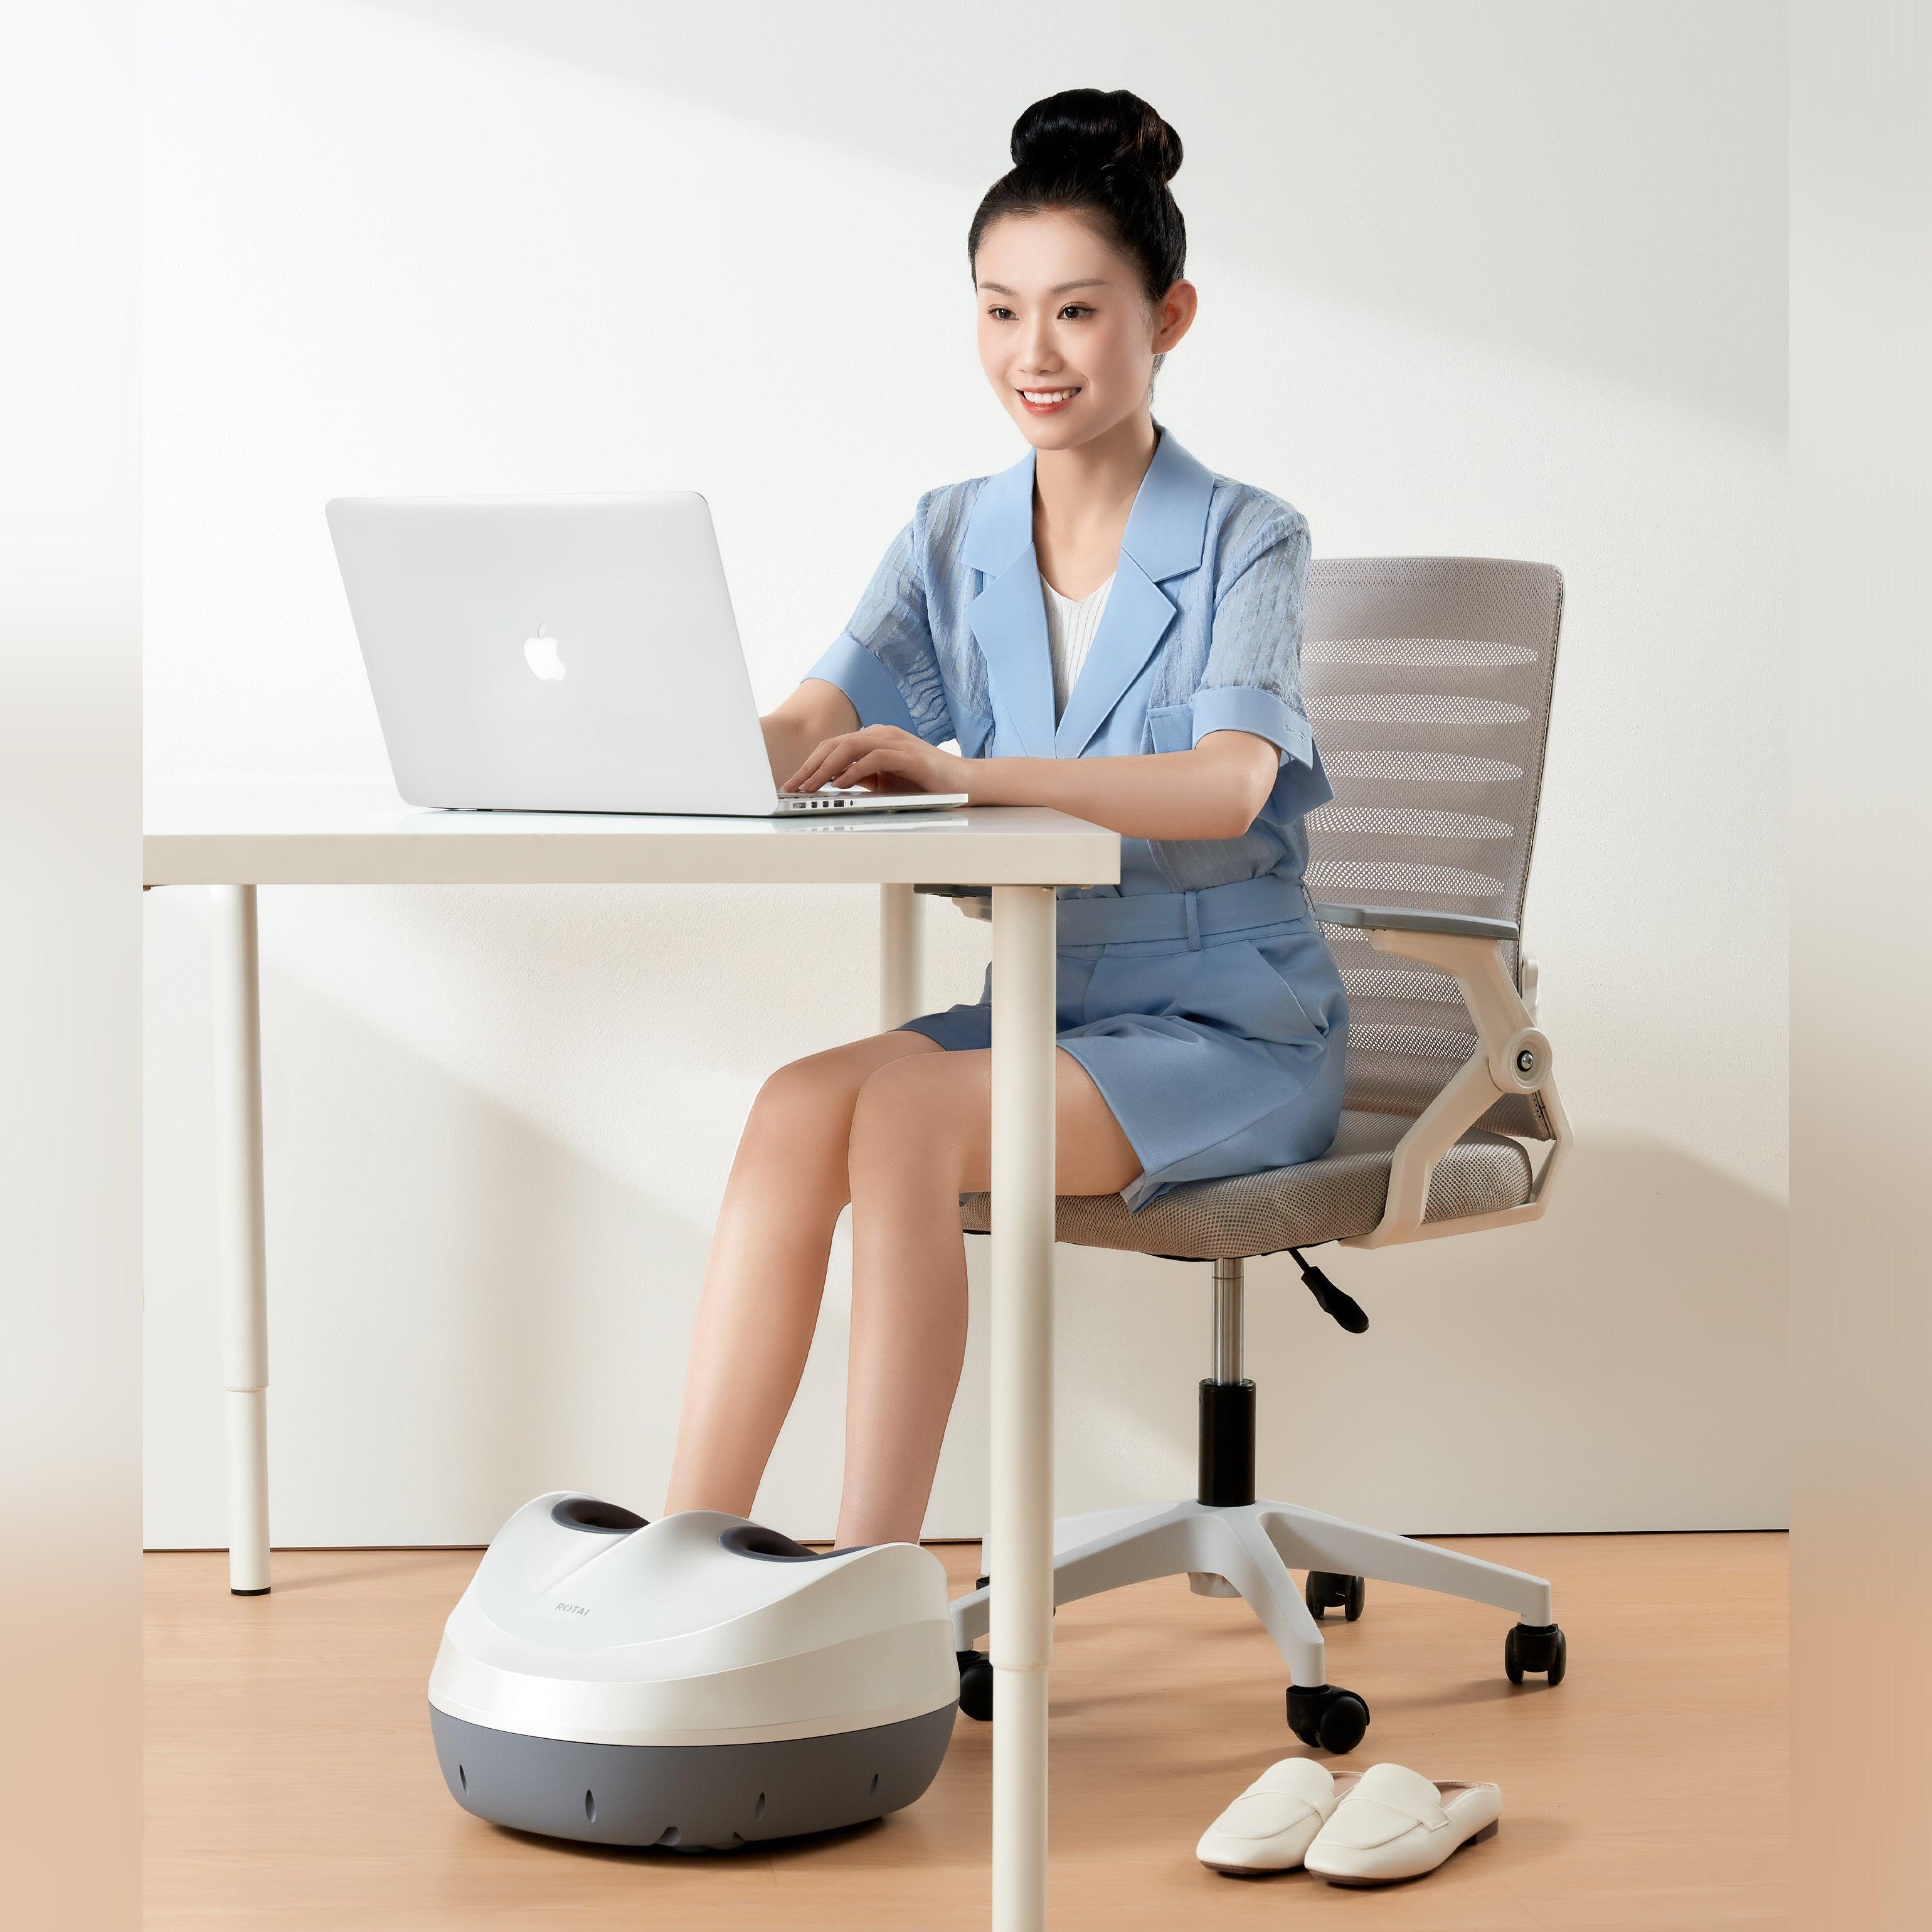 Woman using a foot massager while working at a desk in an office setting